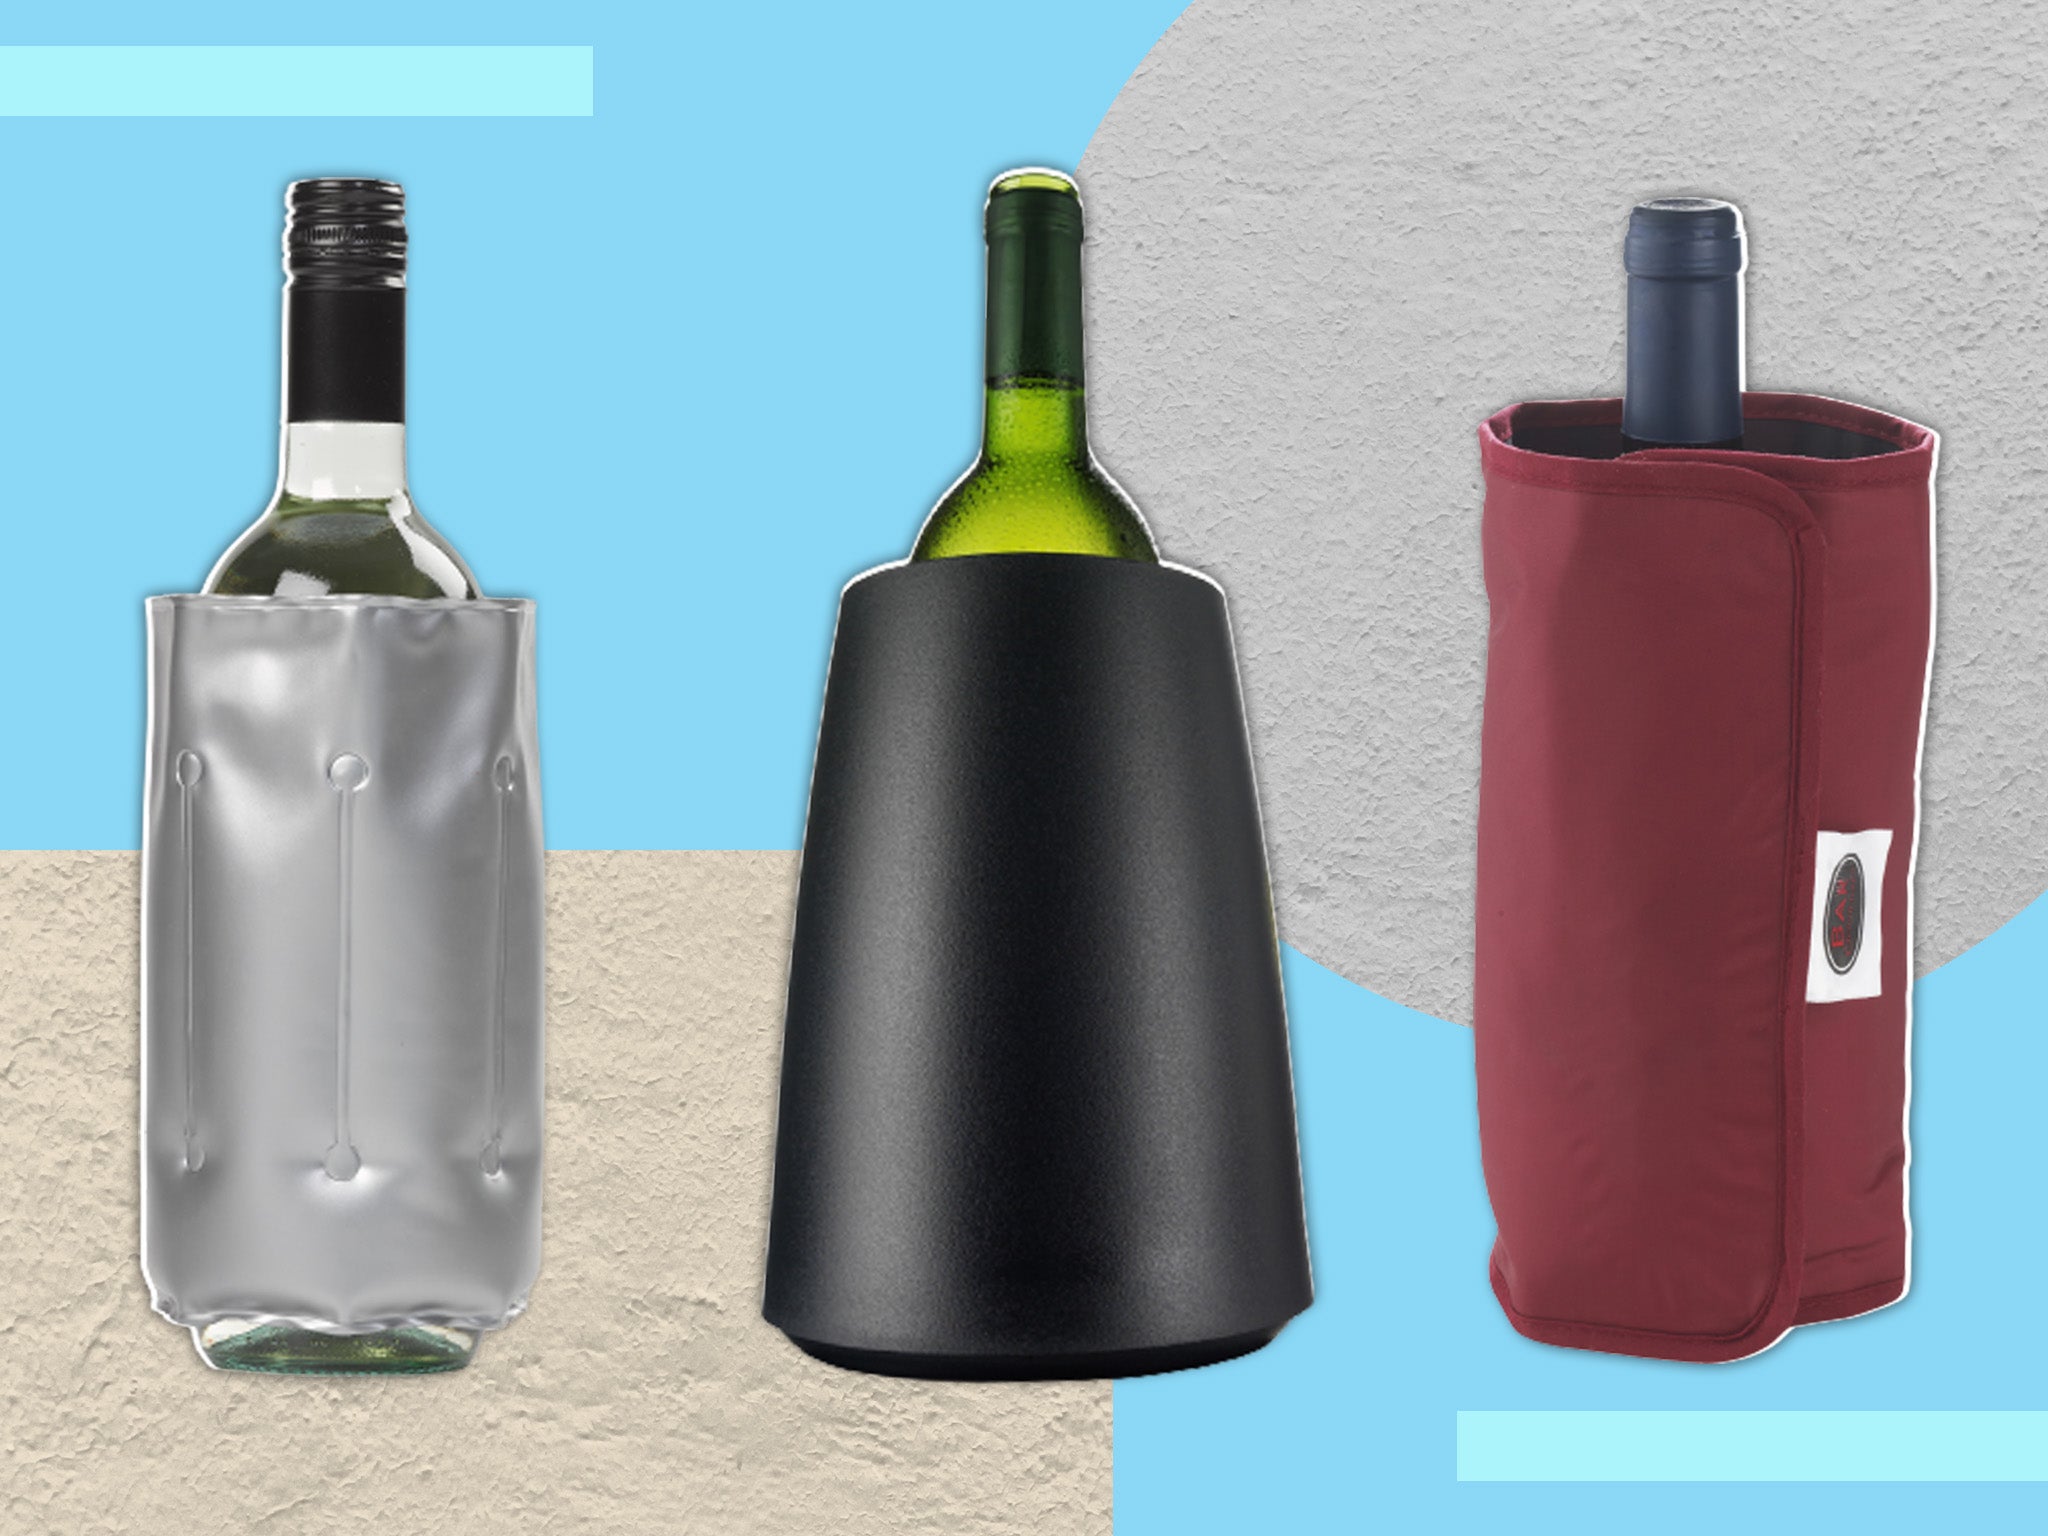 Ideal for Outdoor Summer Parties Insulated Chiller Keeps Wine at the Perfect Temperature Stainless Steel Portable Wine Bottle Cooler by REDUCE No Ice Required Fits Most Wine Bottles- Charcoal 